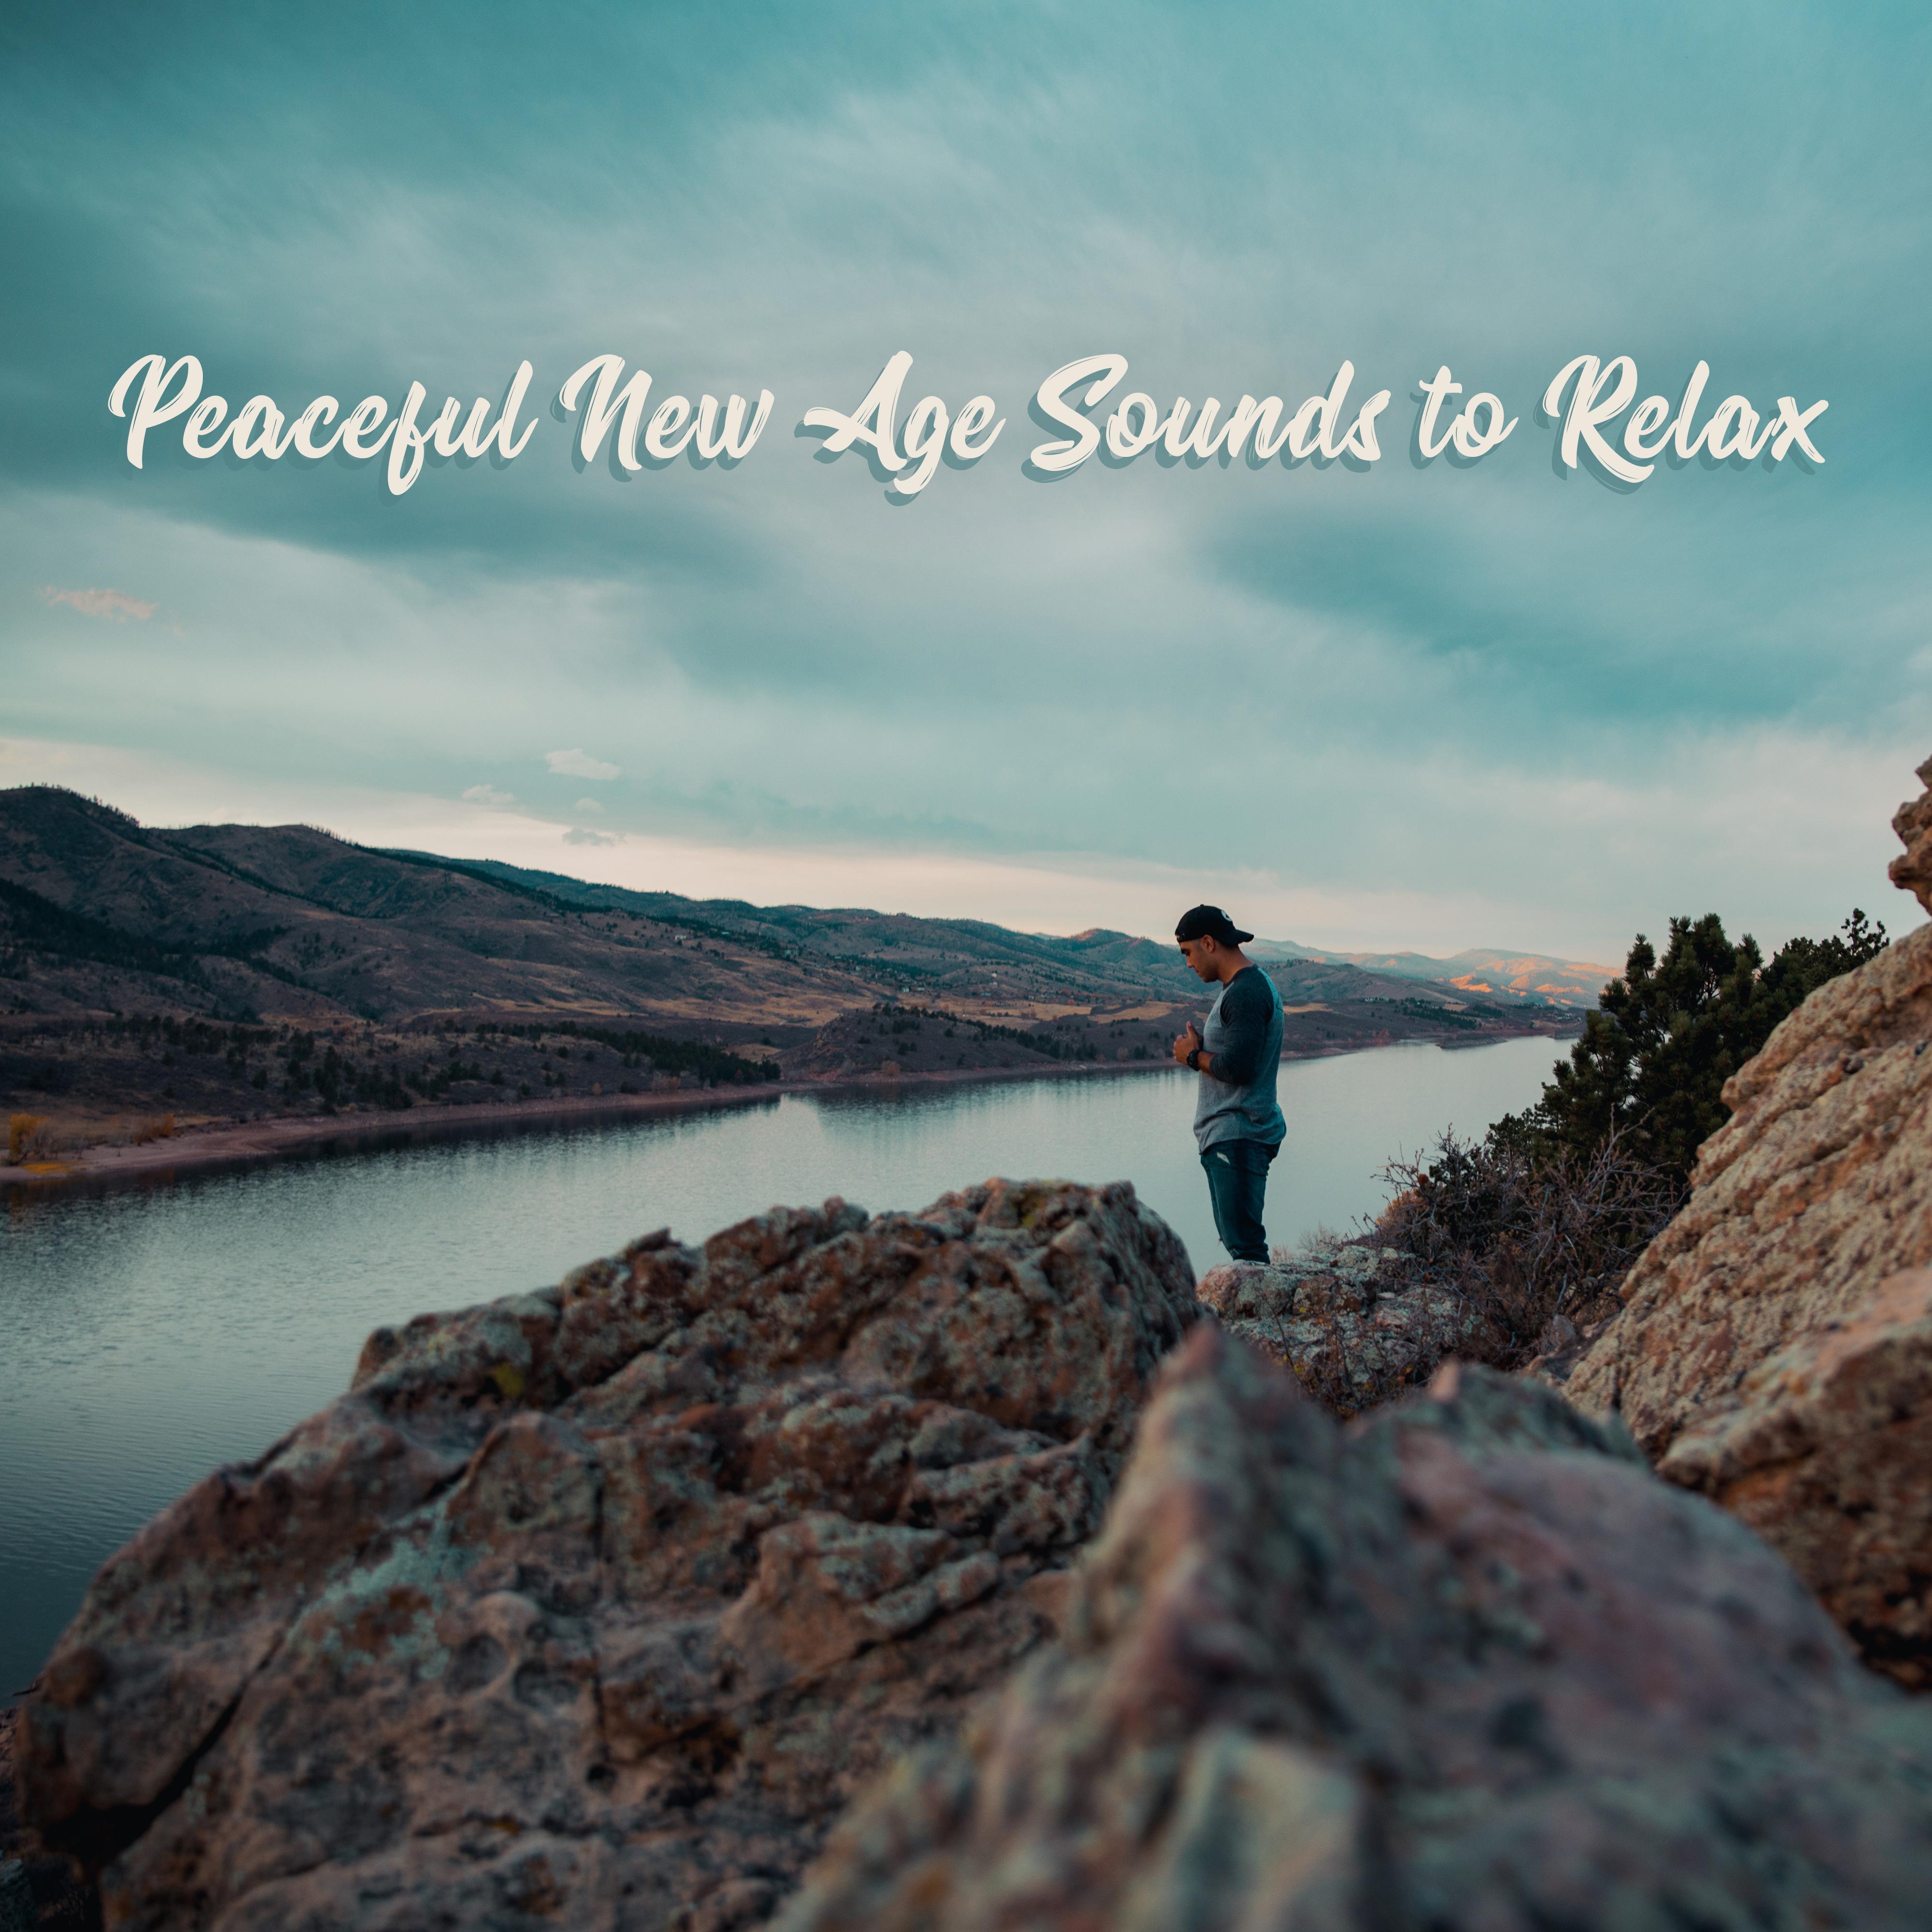 Peaceful New Age Sounds to Relax